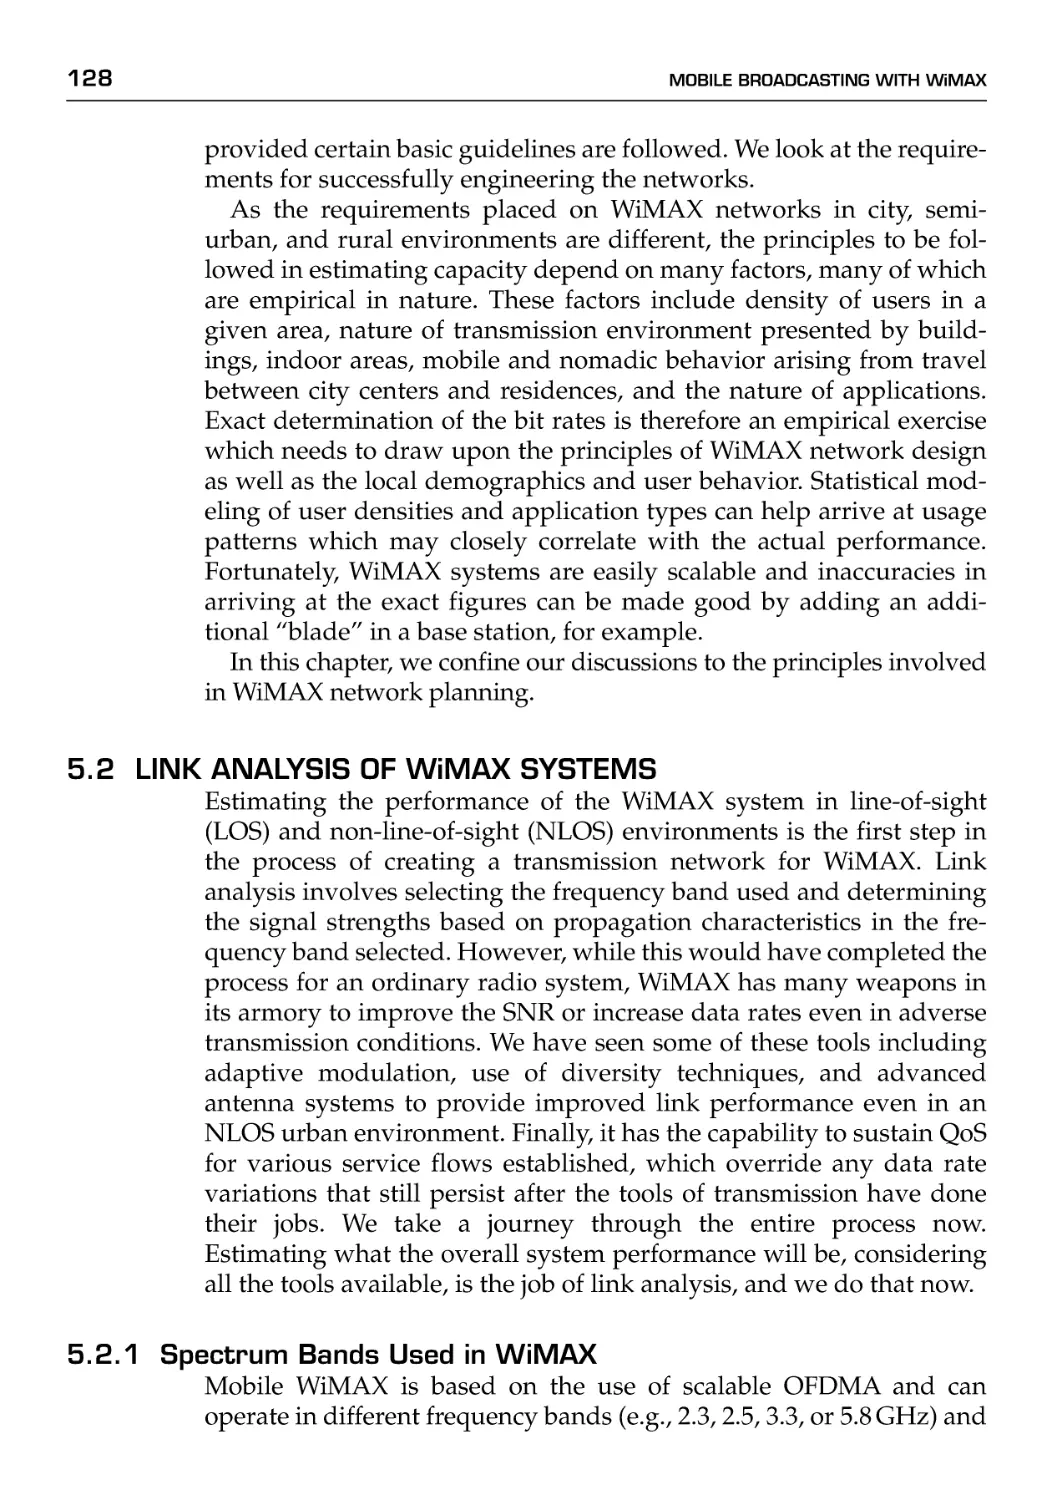 5.2 Link Analysis of WiMAX Systems